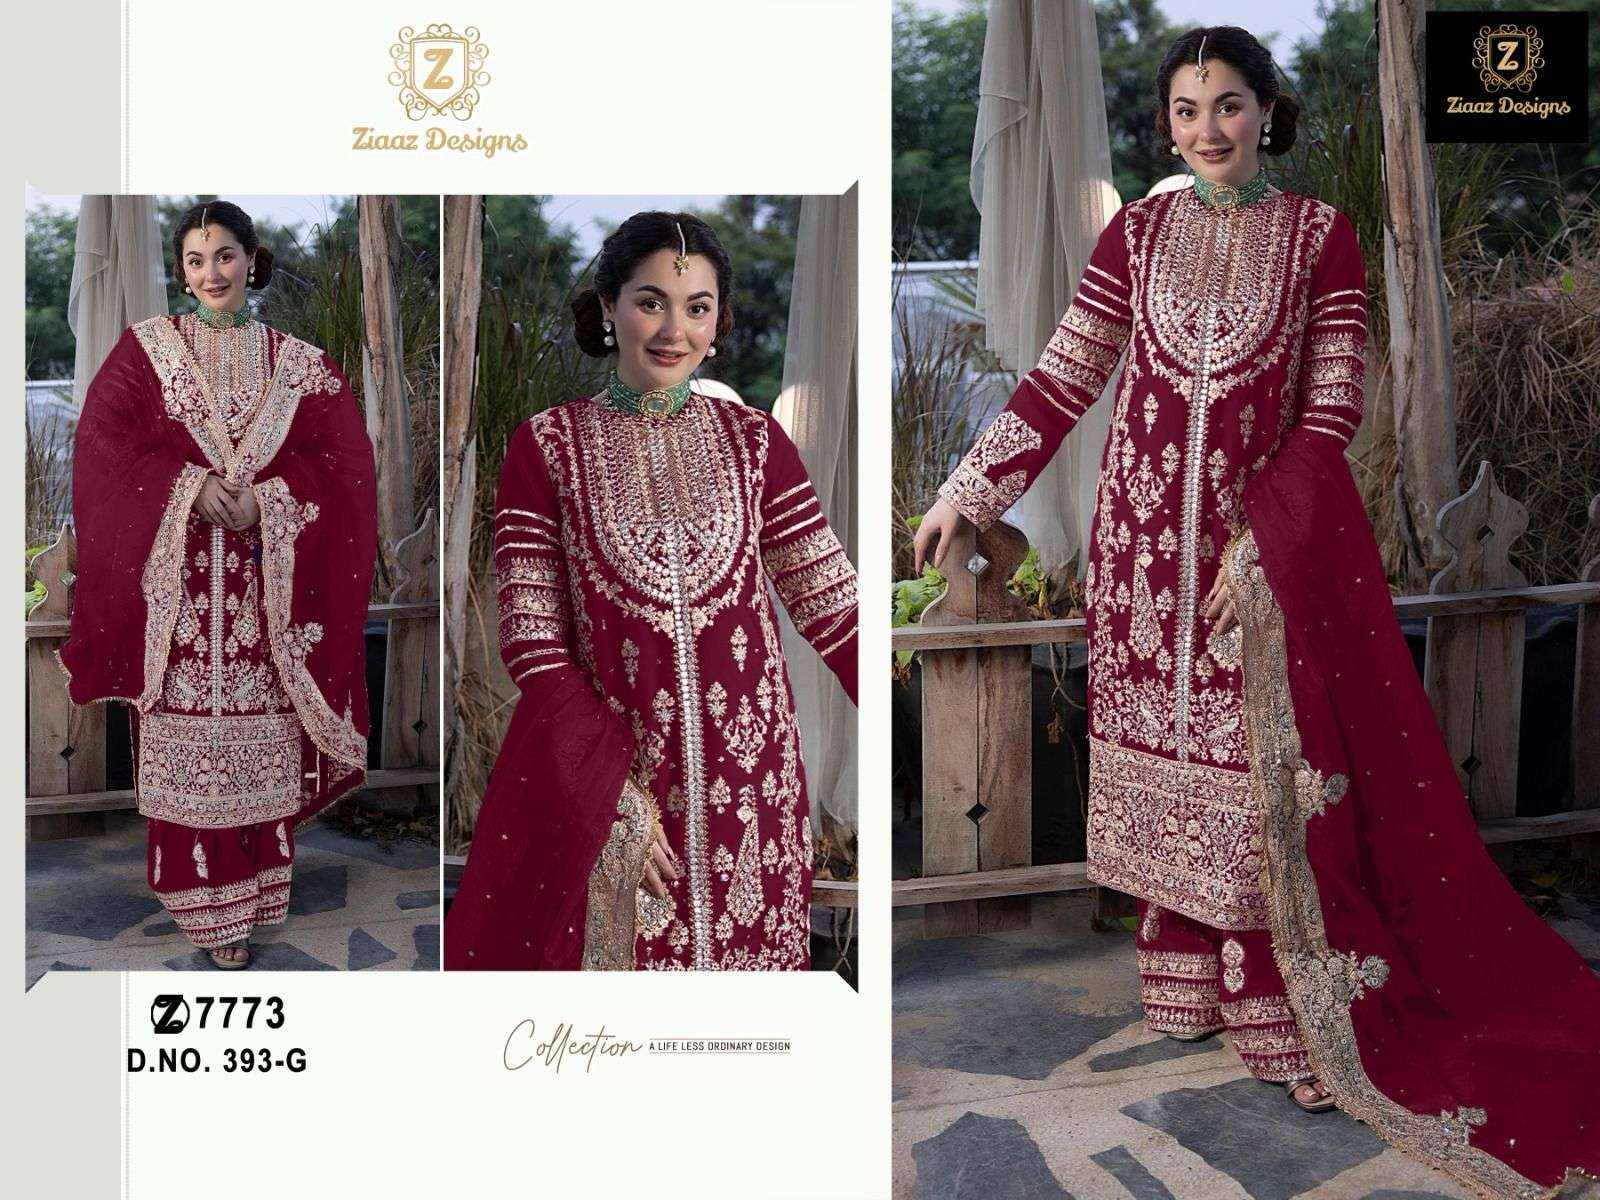 ziaaz designs 393 Georgette very heavy embroidered suit